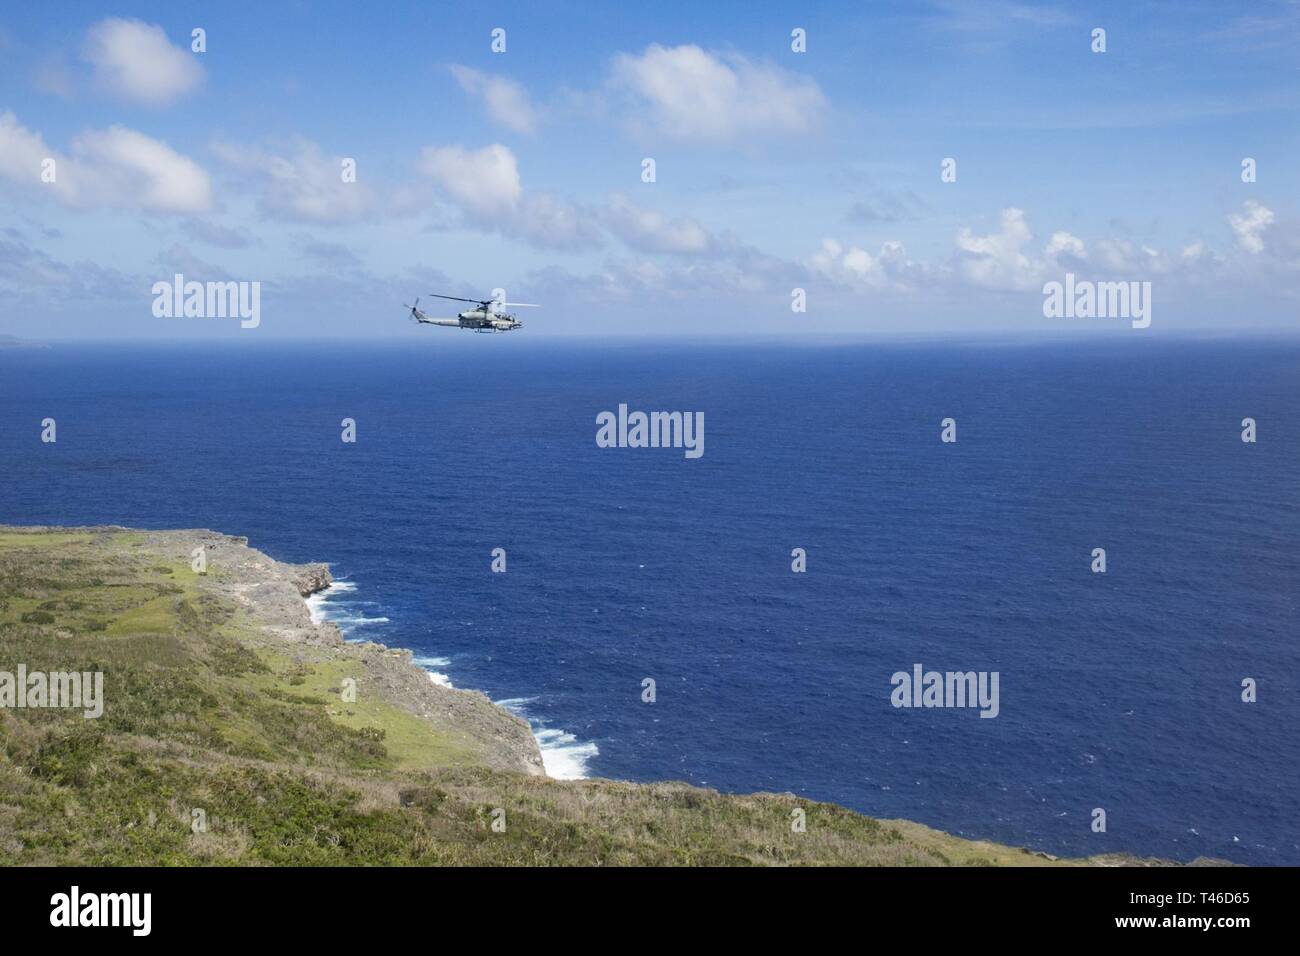 An AH-1Z Viper helicopter belonging to Marine Medium Tiltrotor Squadron 262 (Reinforced) flies toward Tinian, Commonwealth of the Northern Mariana Islands, March 11, 2019. Marines and Sailors with Combat Logistics Battalion 31 led a multi-service task force, partnering with the Federal Emergency Management Agency, to help the U.S. citizens of Tinian begin recovery efforts in the wake of Super Typhoon Yutu last year. The Marines and Sailors, currently participating in two weeks of unit-level training on nearby Guam, visited Tinian to meet with members of the community affected by Yutu in late O Stock Photo